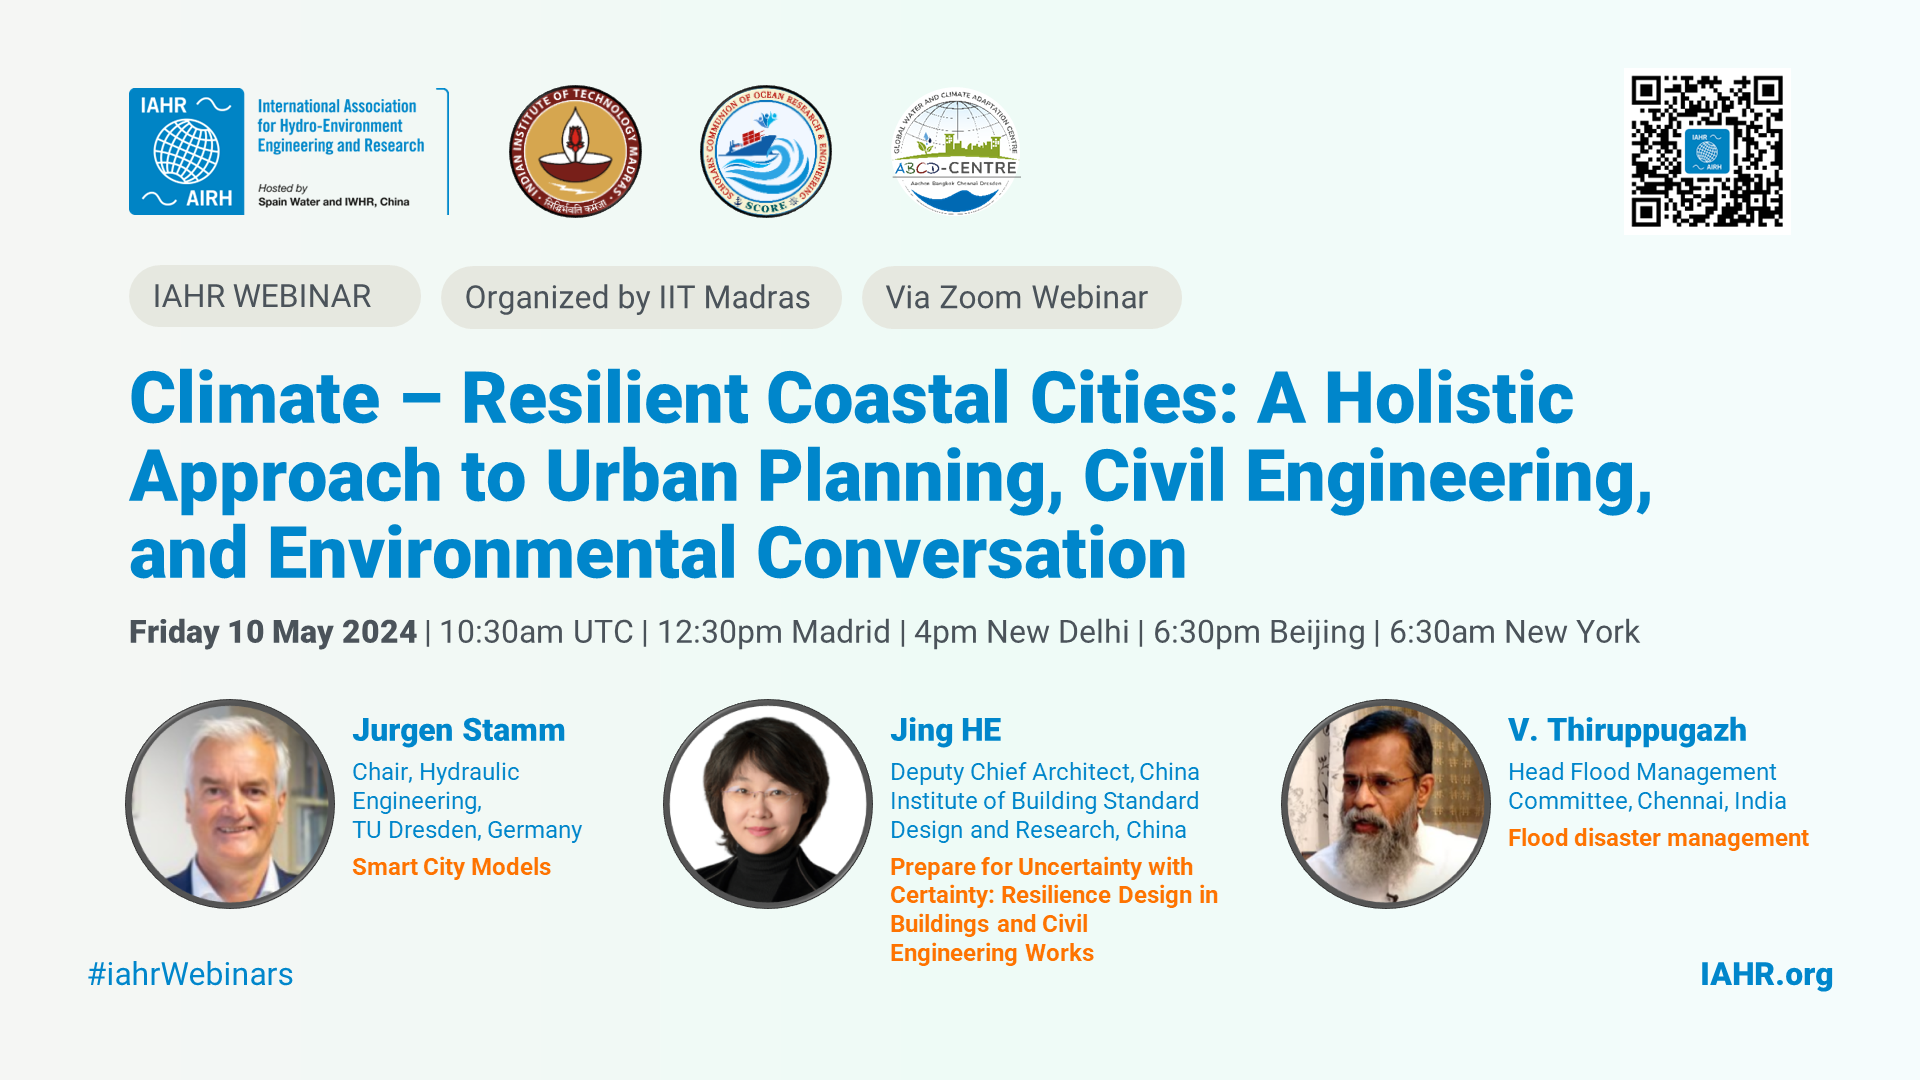 Climate - Resilient Coastal Cities: A Holistic approach to Urban Planning, Civil Engineering and Environmental Conservation